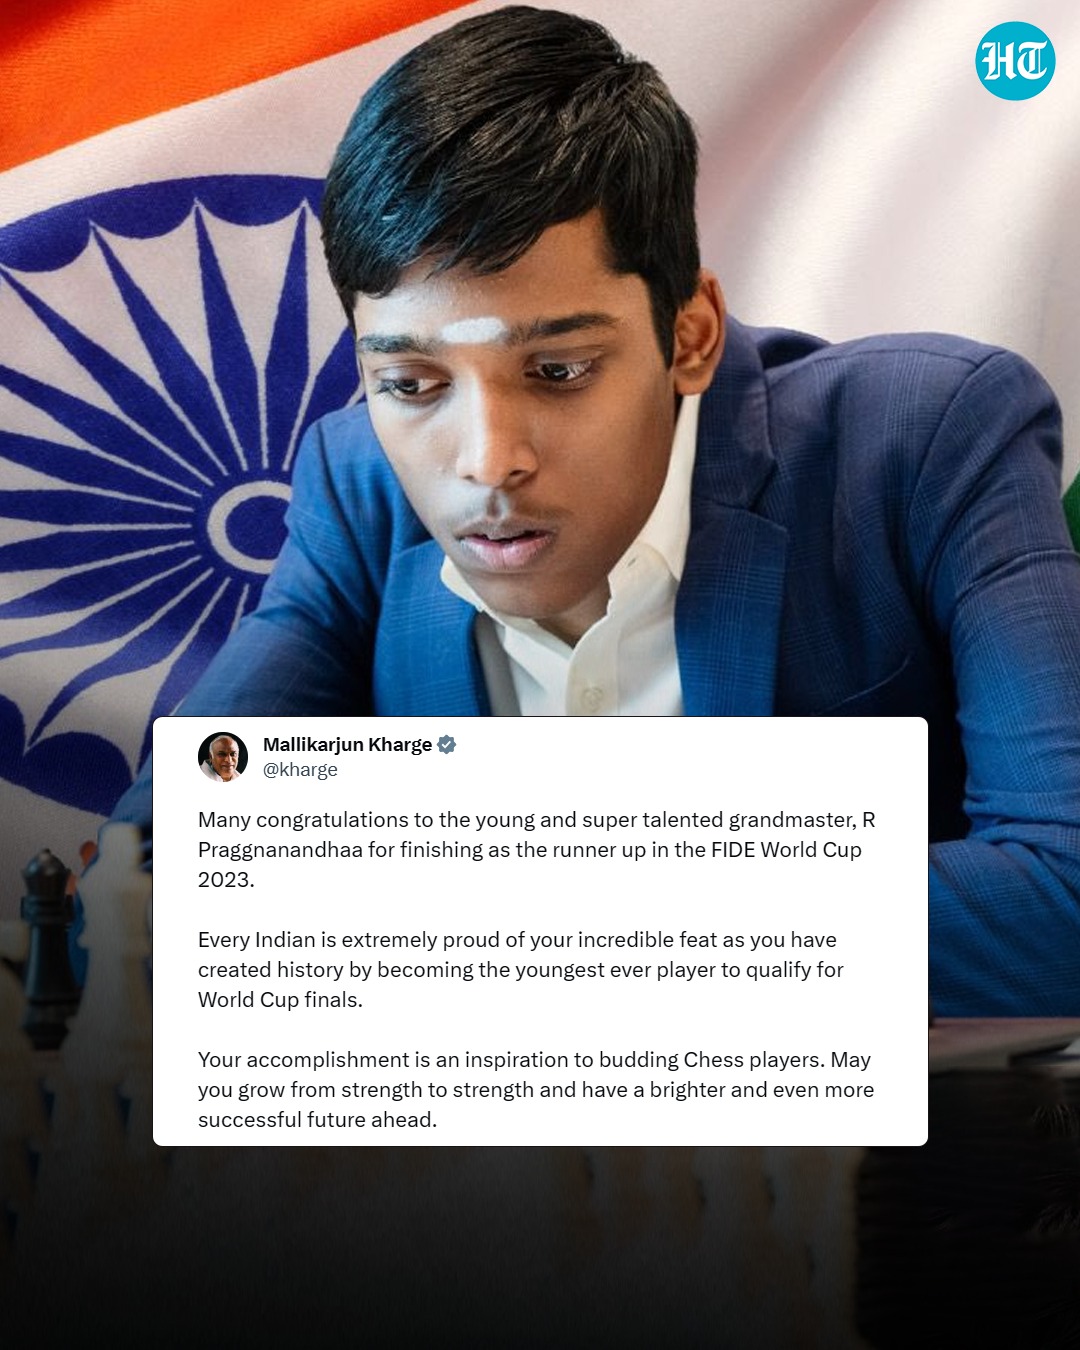 Mallikarjun Kharge on X: Many congratulations to the young and super  talented grandmaster, R Praggnanandhaa for finishing as the runner up in  the FIDE World Cup 2023. Every Indian is extremely proud